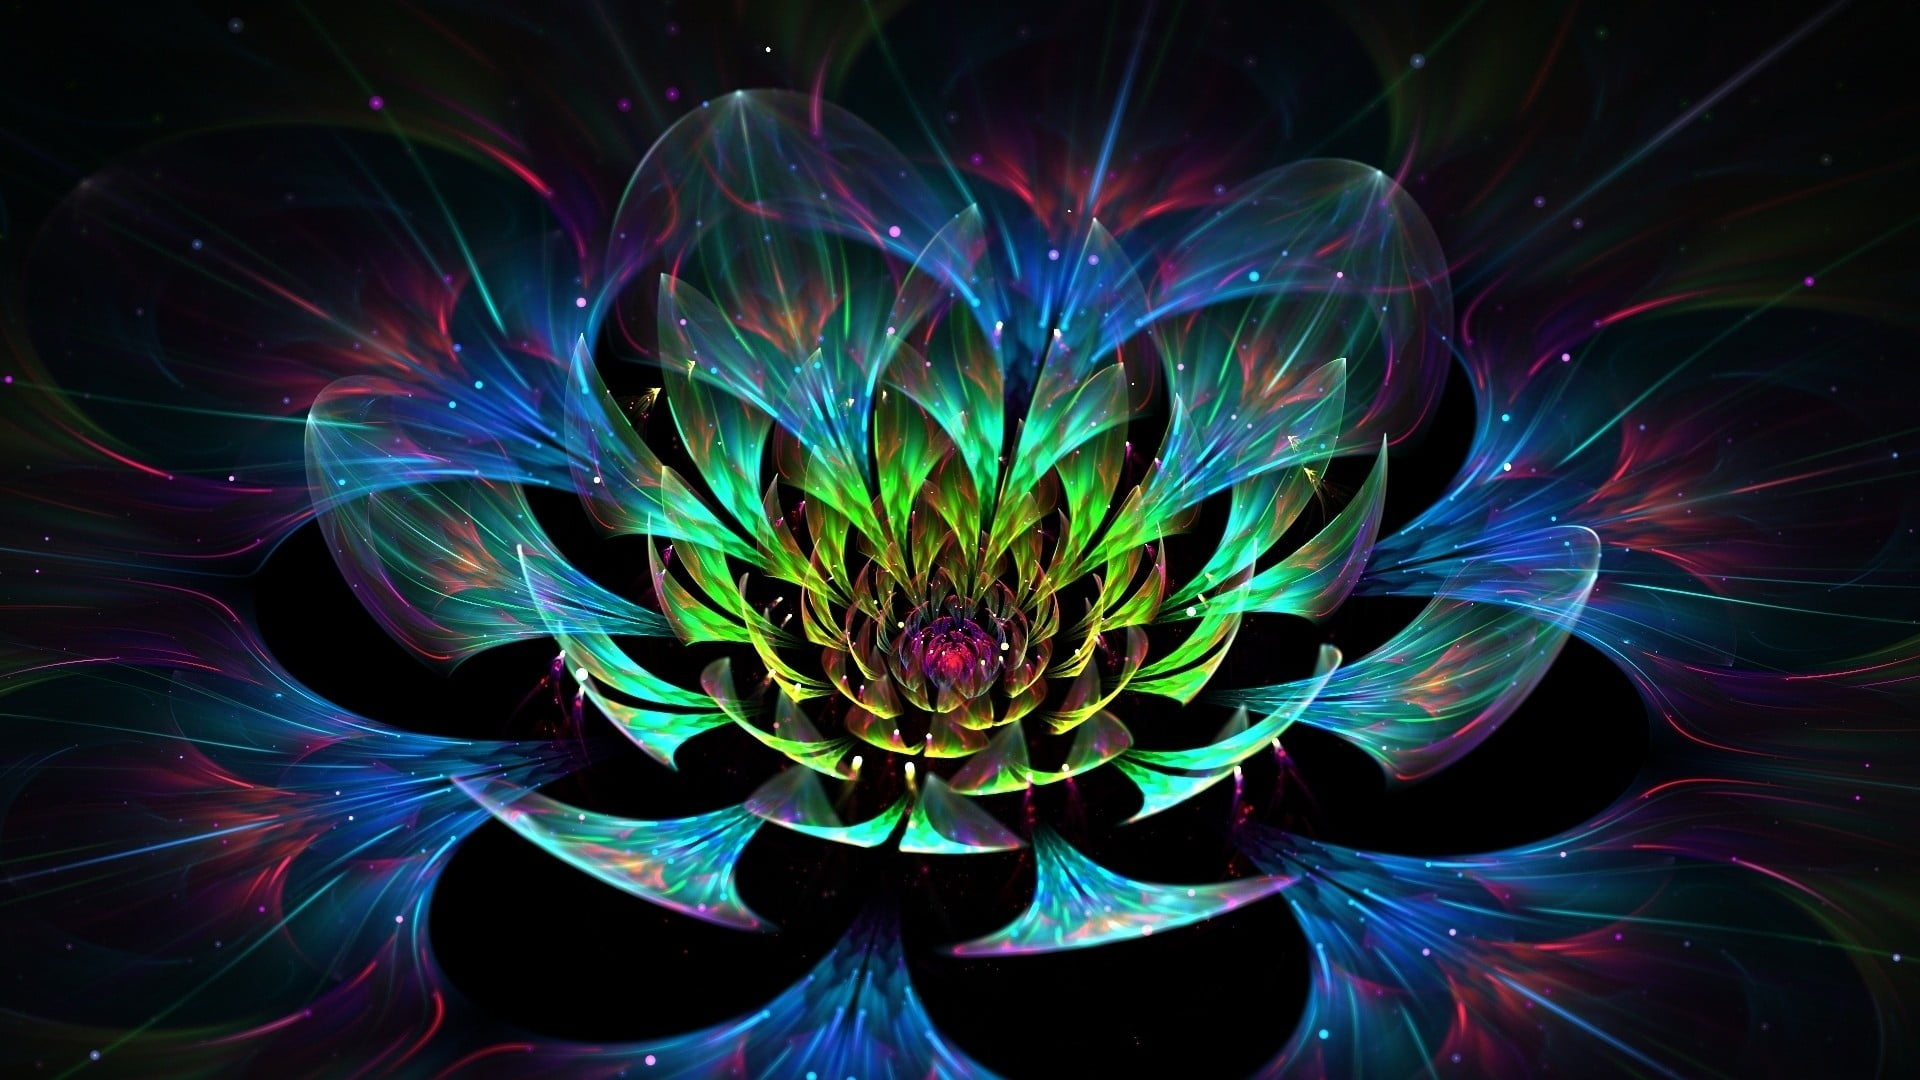 abstract art, digital art, colorful, fractal flowers, glowing